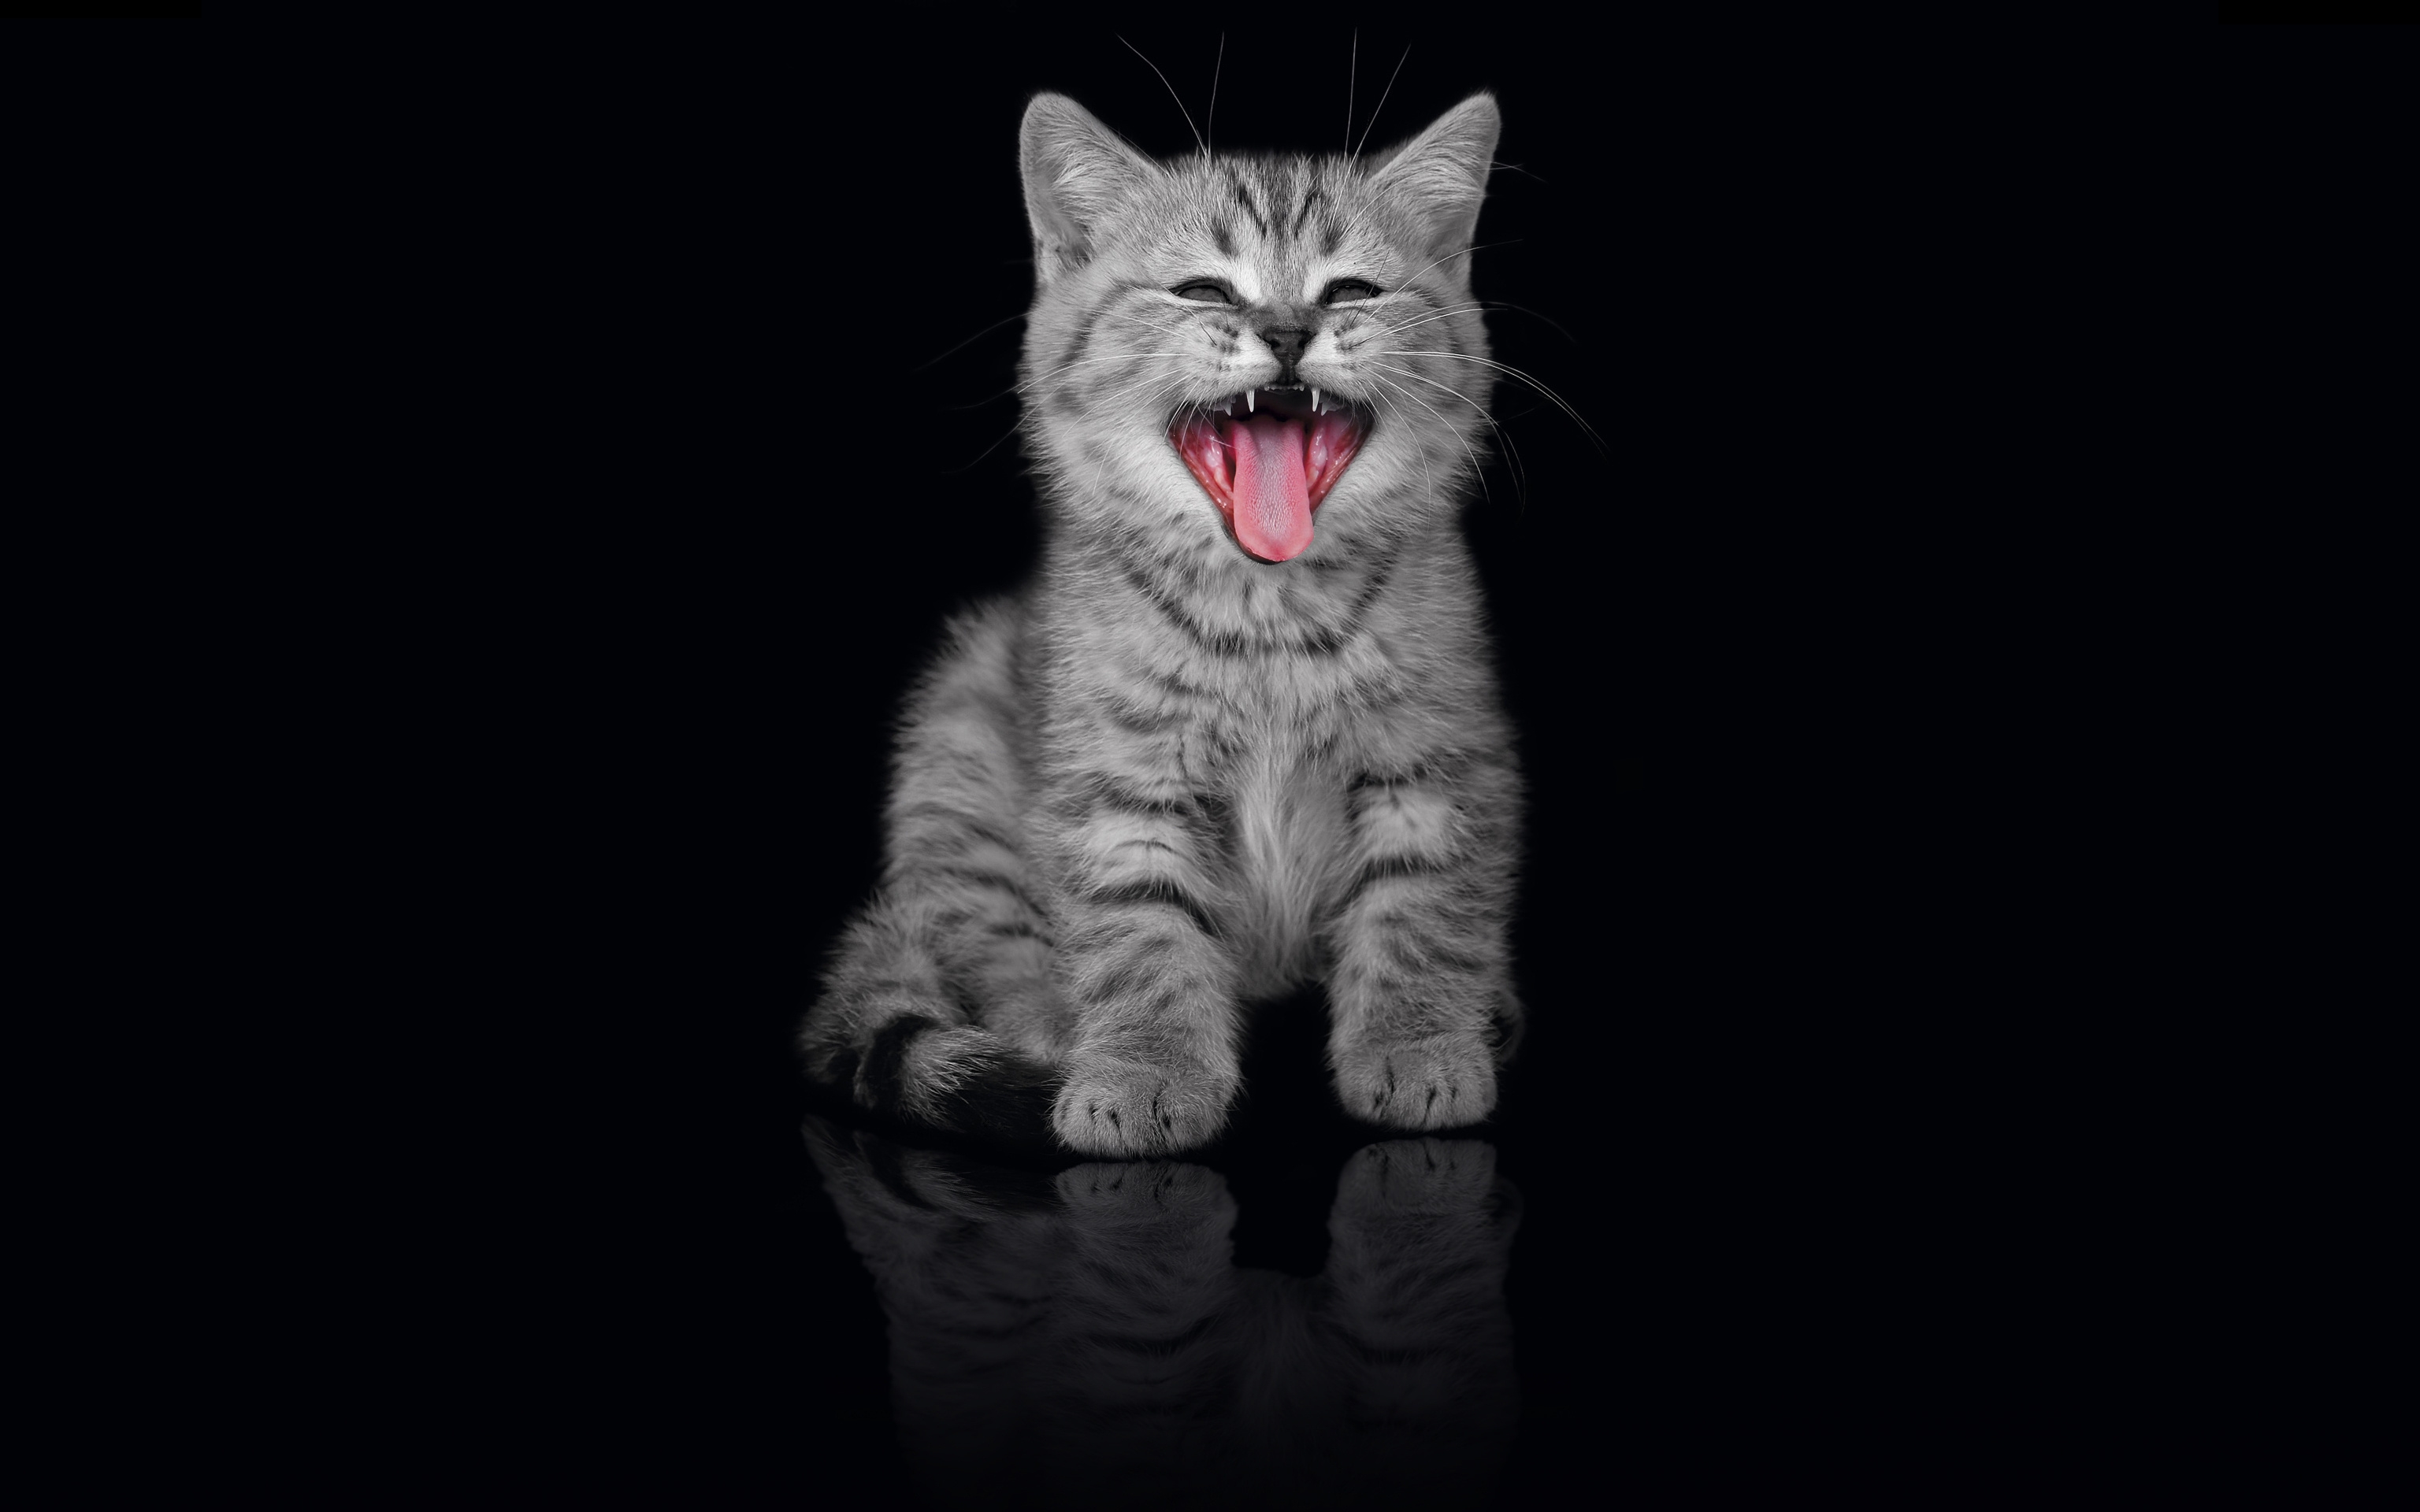 61645 Screensavers and Wallpapers Scream for phone. Download animals, kitty, kitten, dark background, open mouth, scream, cry pictures for free